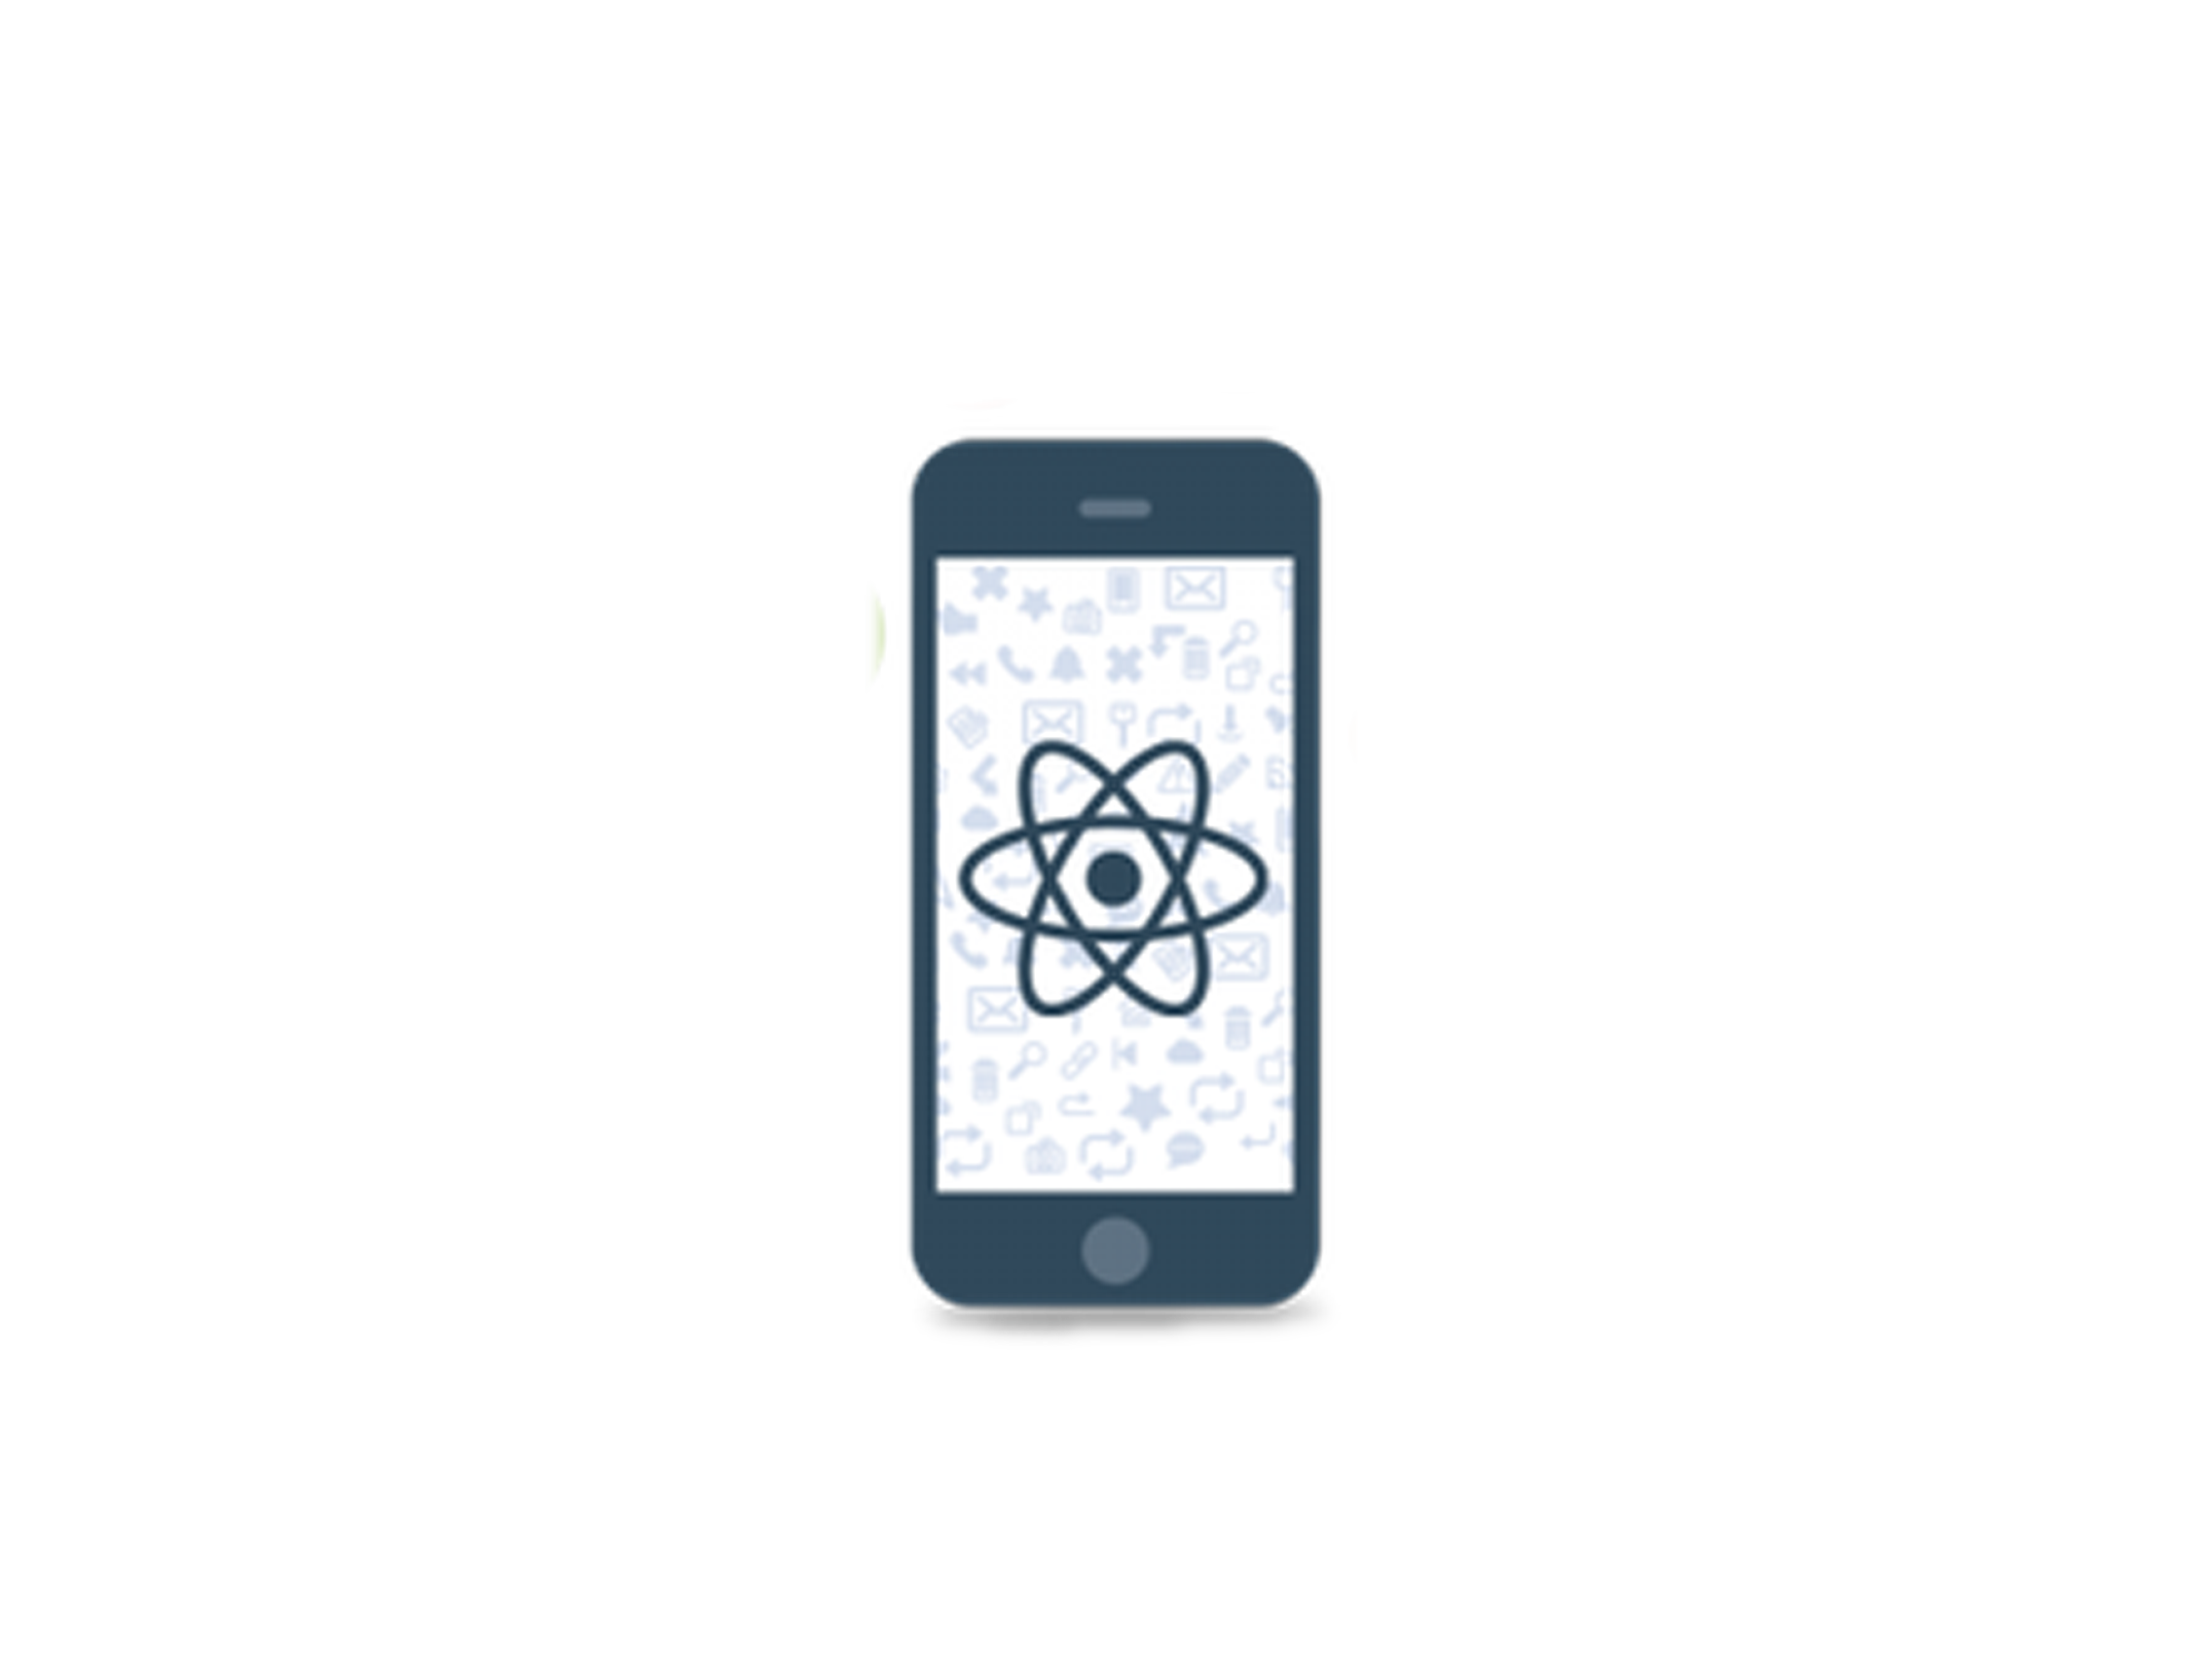 react apps